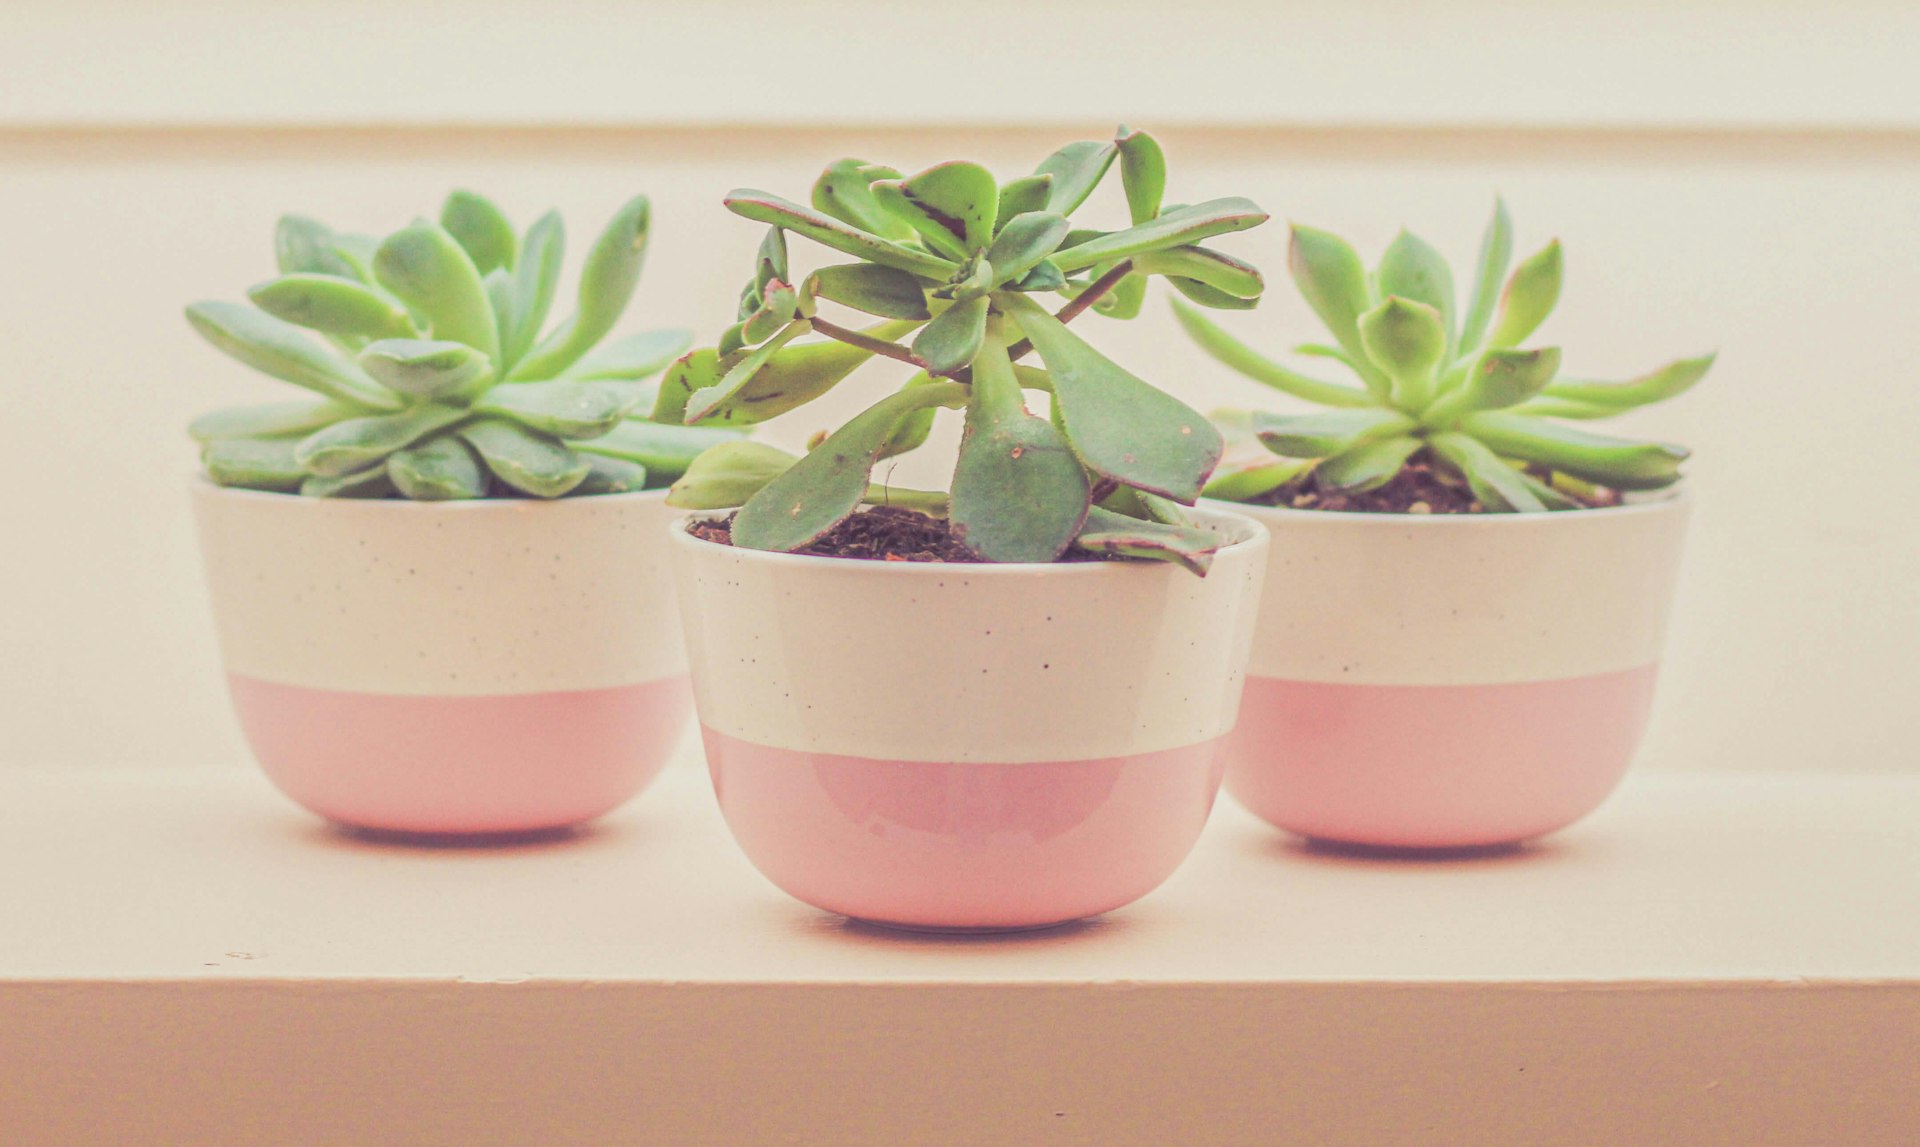 Three small plants in pink and white pots.